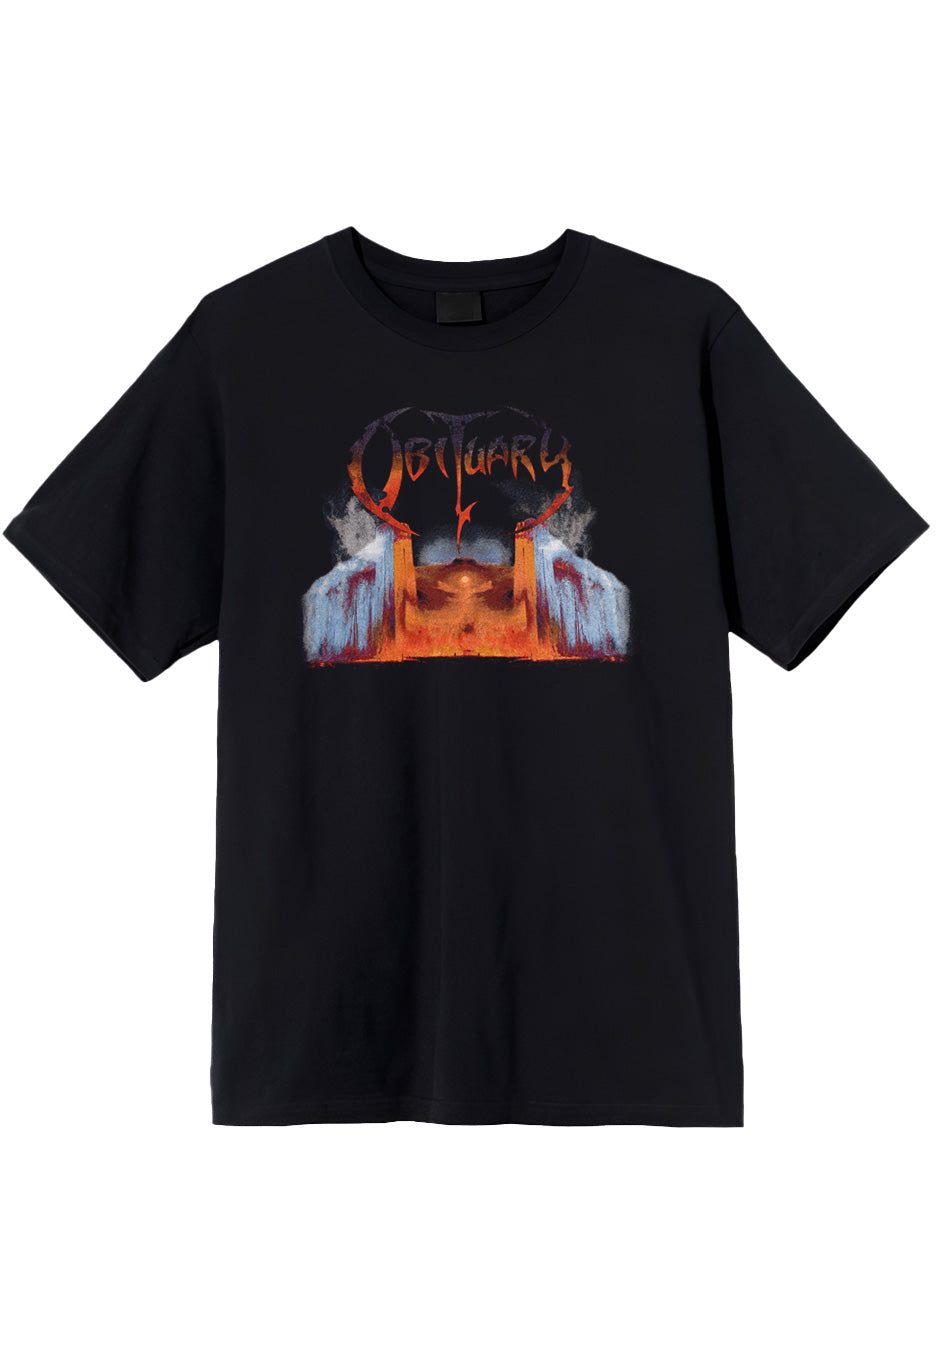 Obituary - Dying Of Everything - T-Shirt